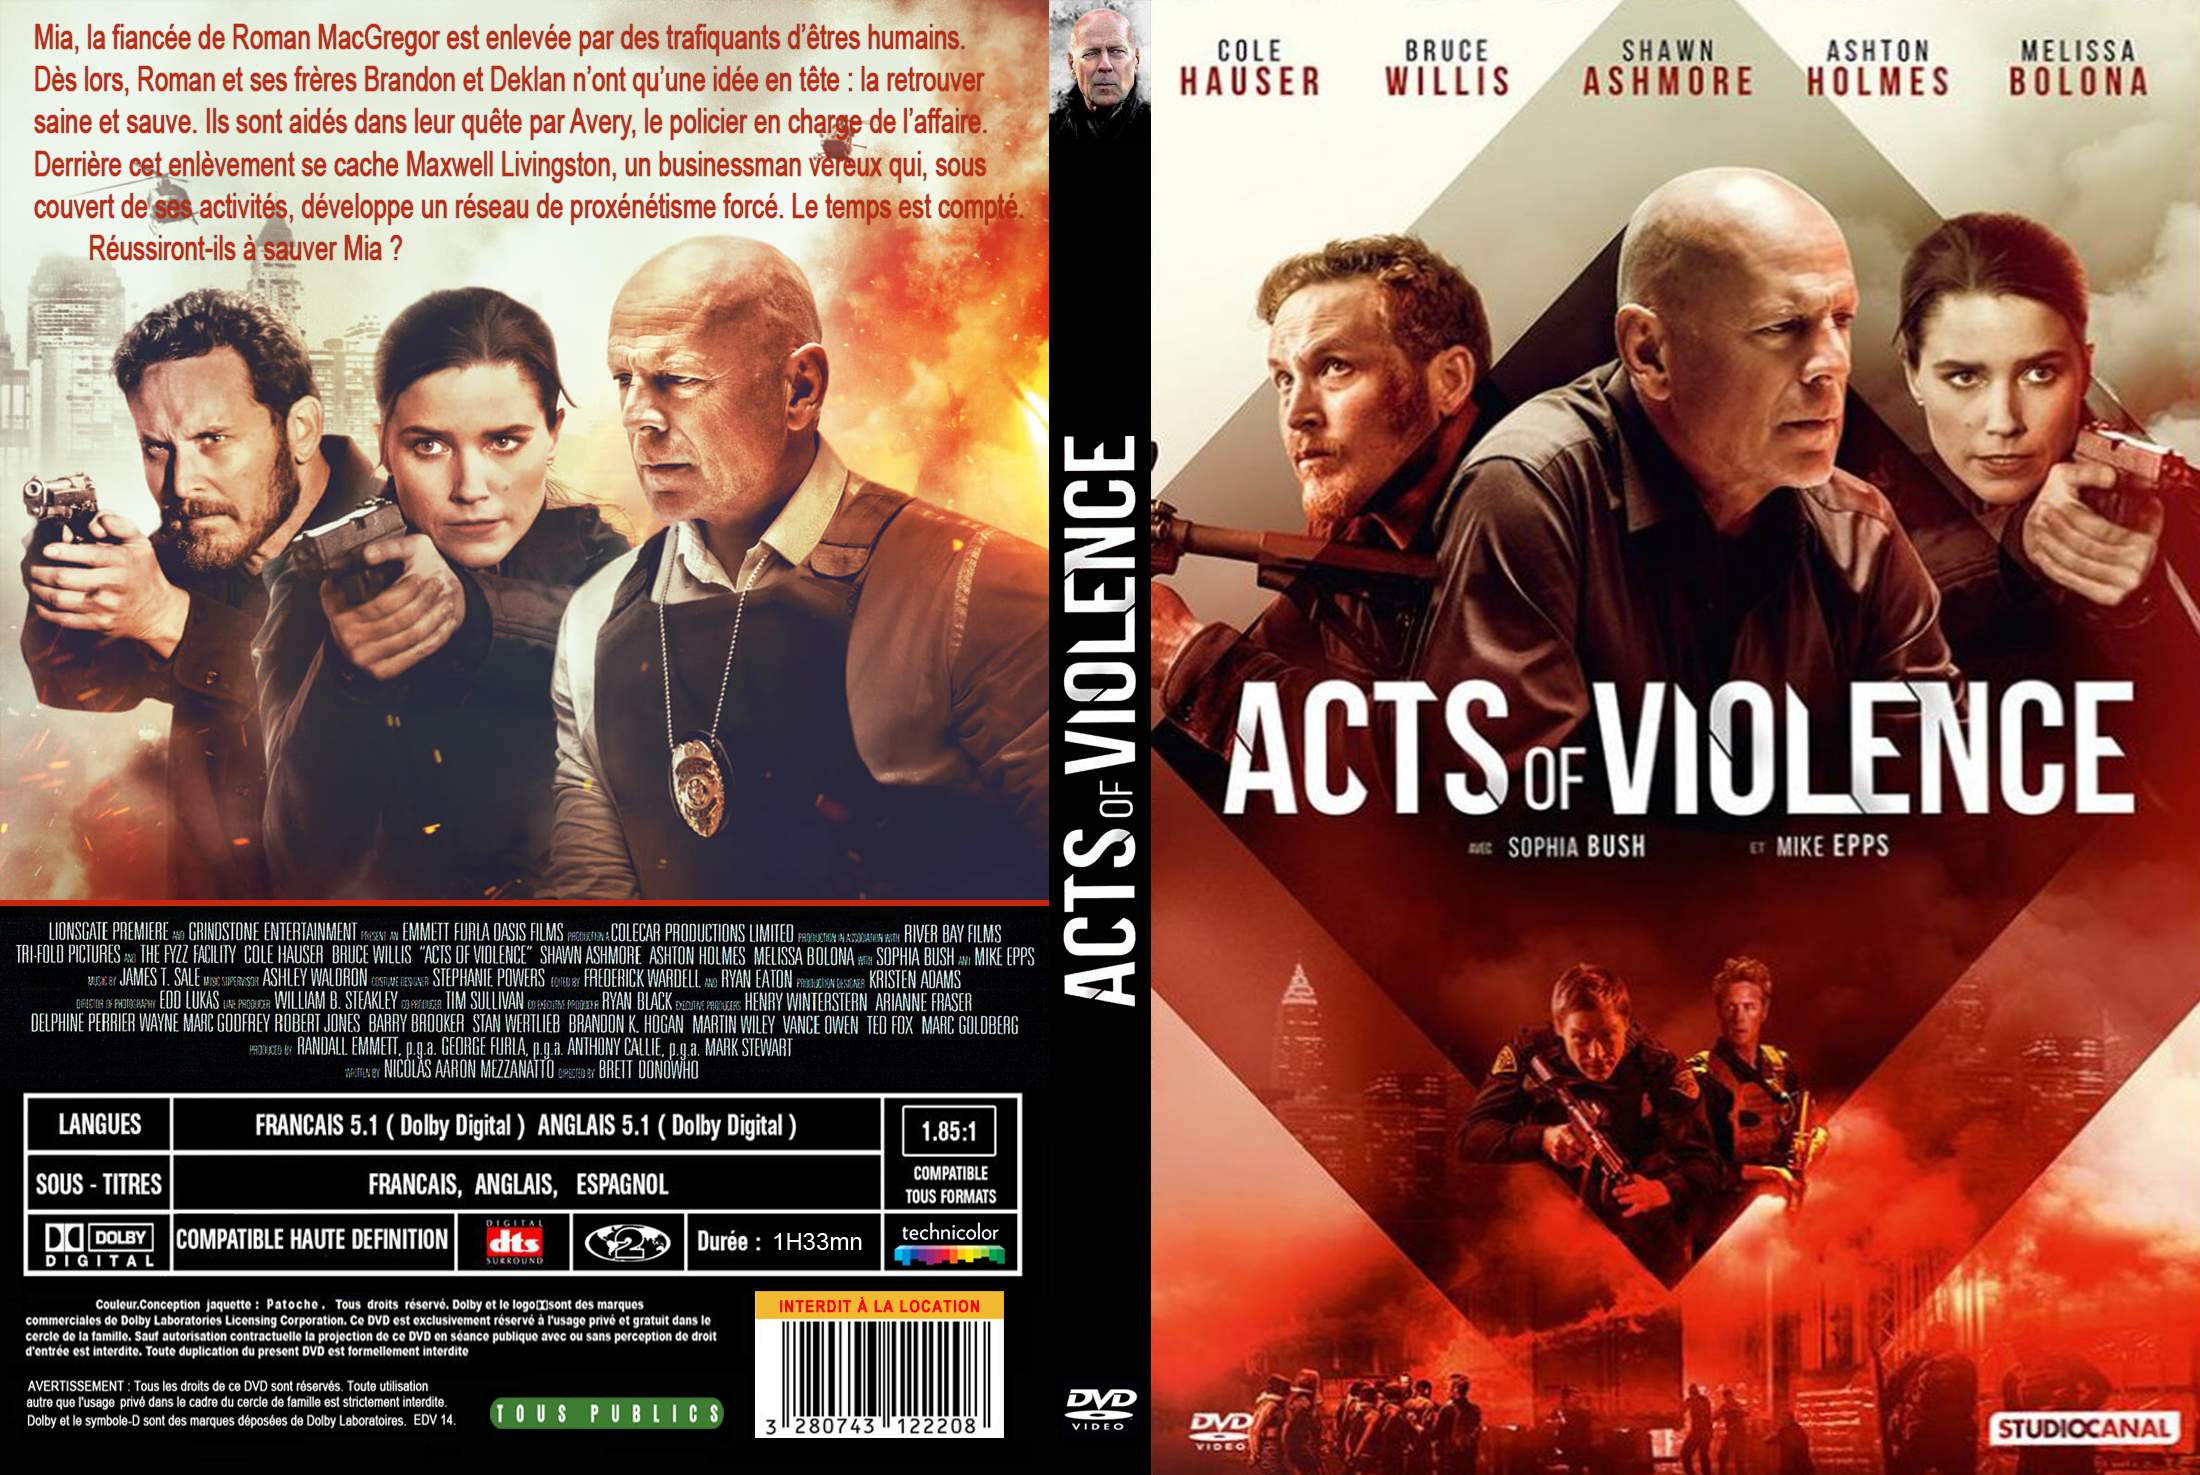 Jaquette DVD Acts of Violence custom